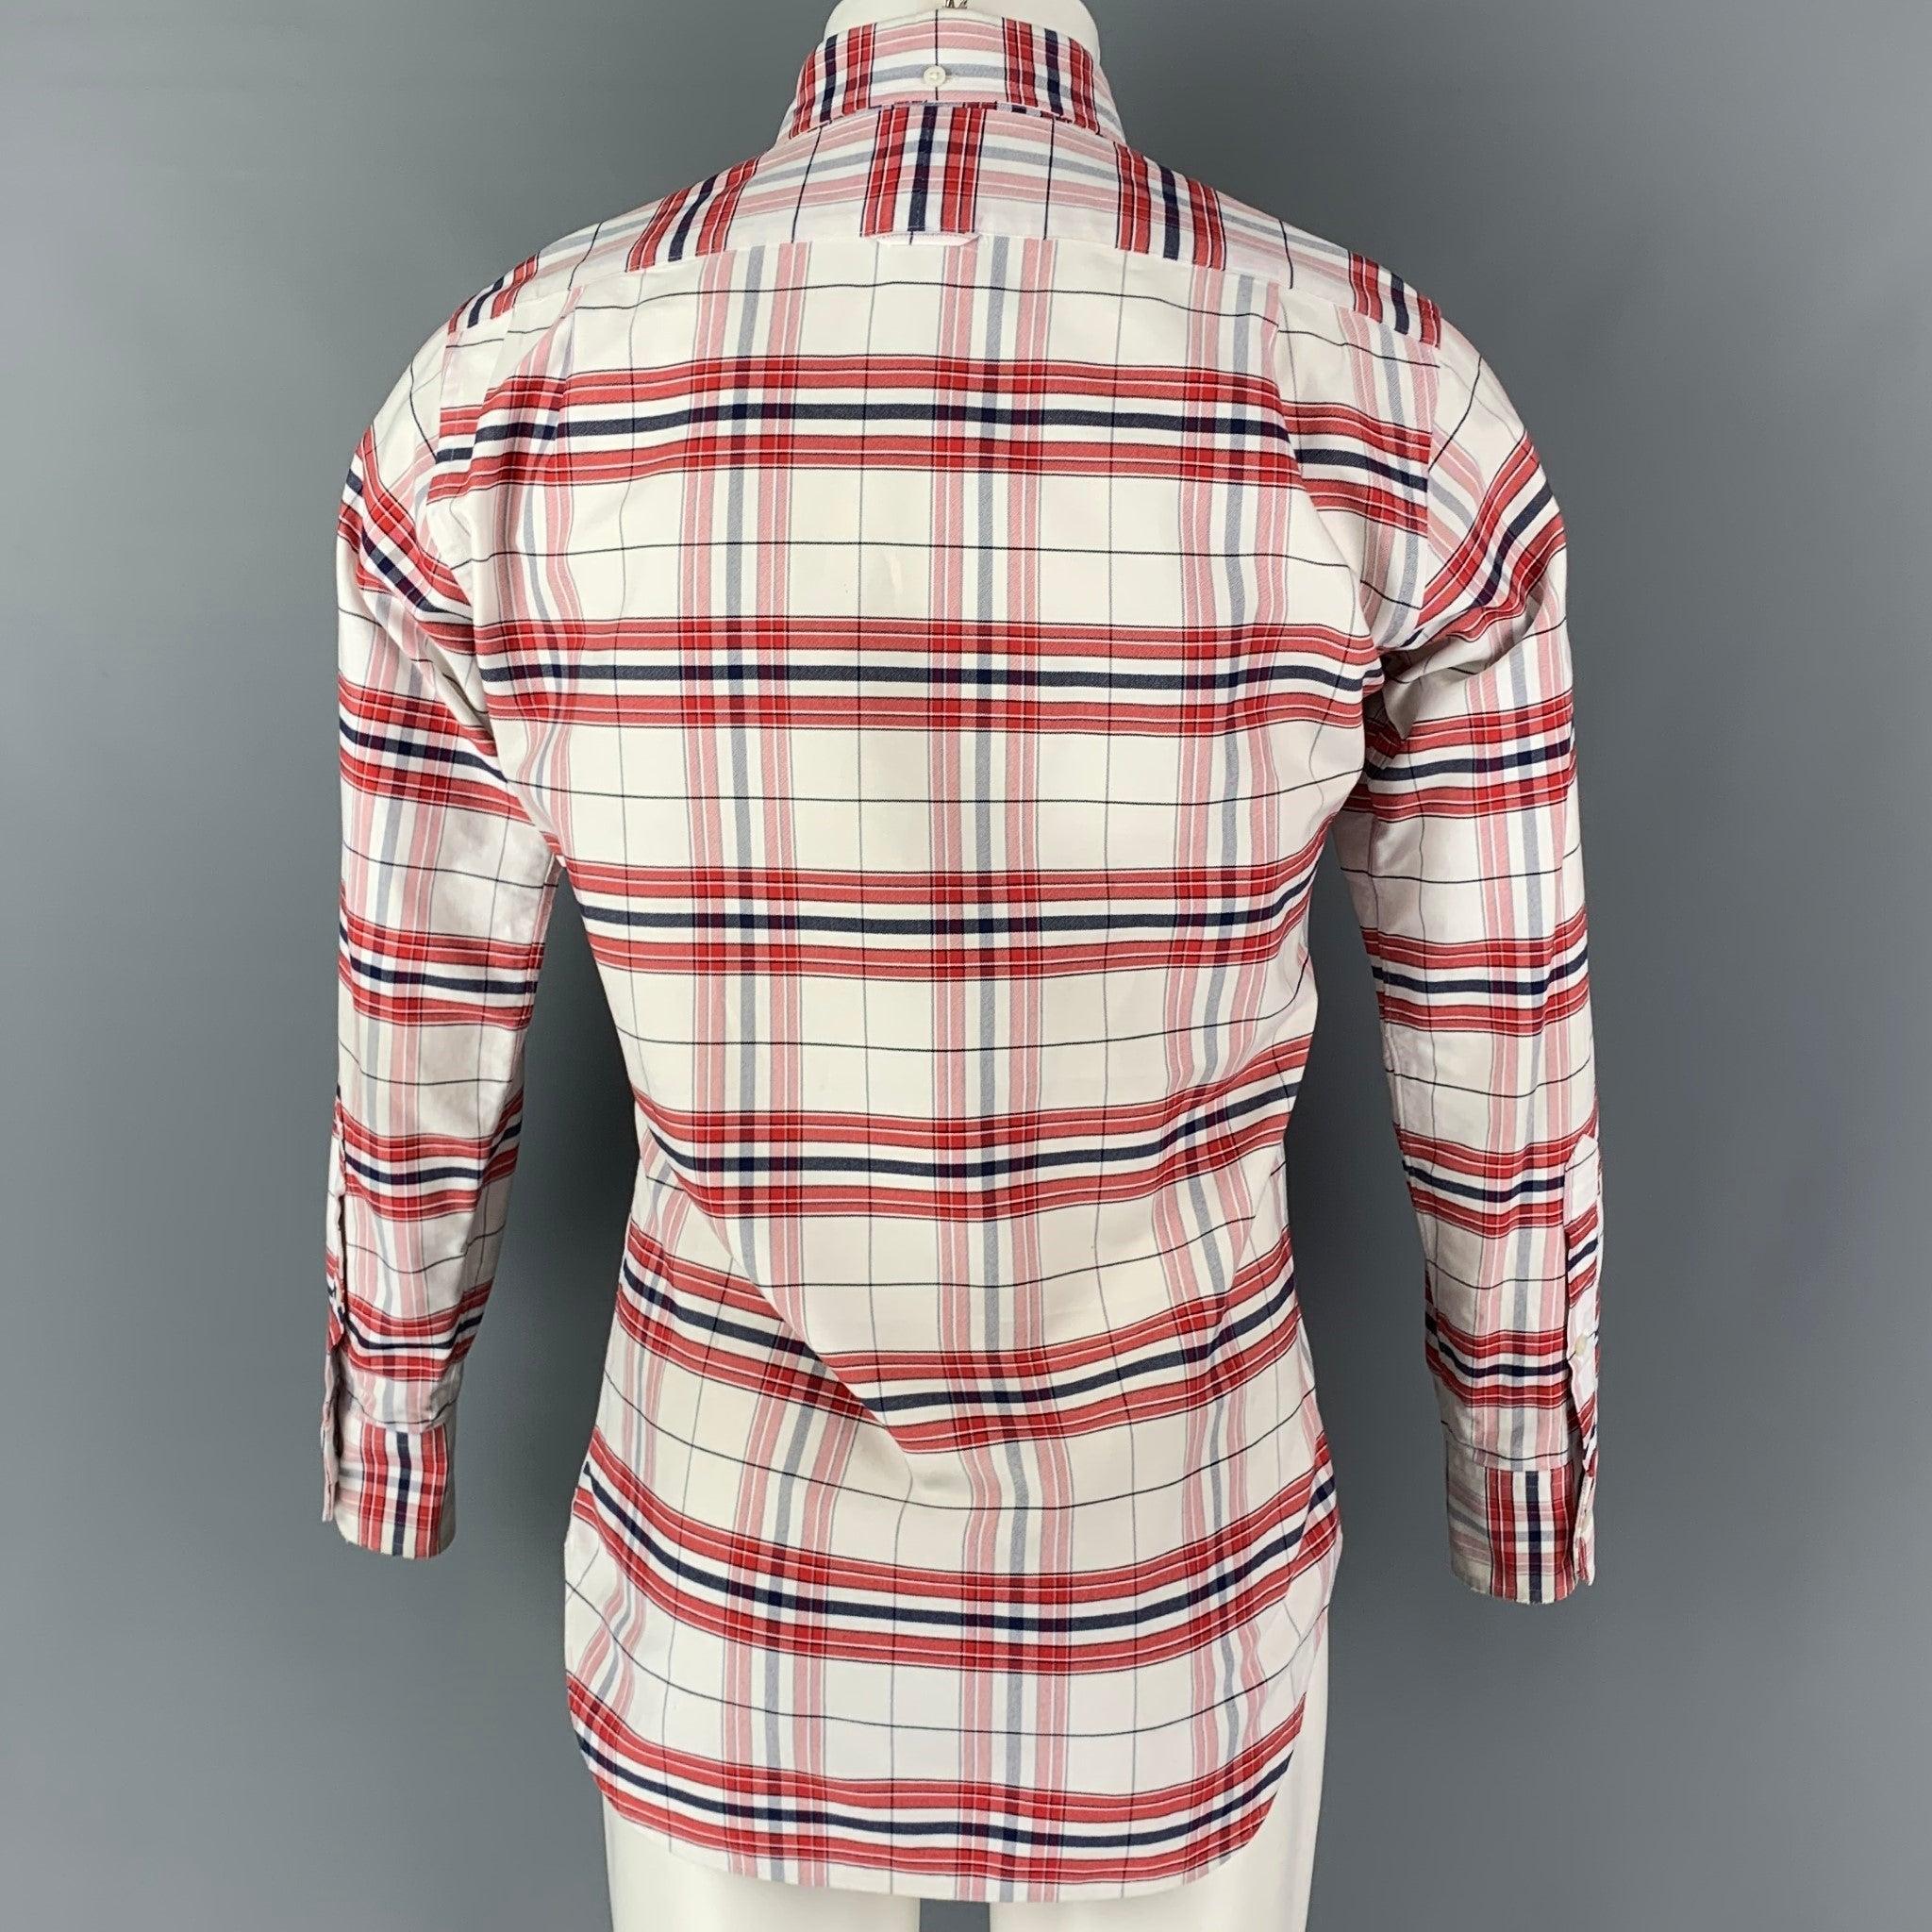 THOM BROWNE Size S White Red Plaid Cotton Button Down Long Sleeve Shirt In Good Condition For Sale In San Francisco, CA